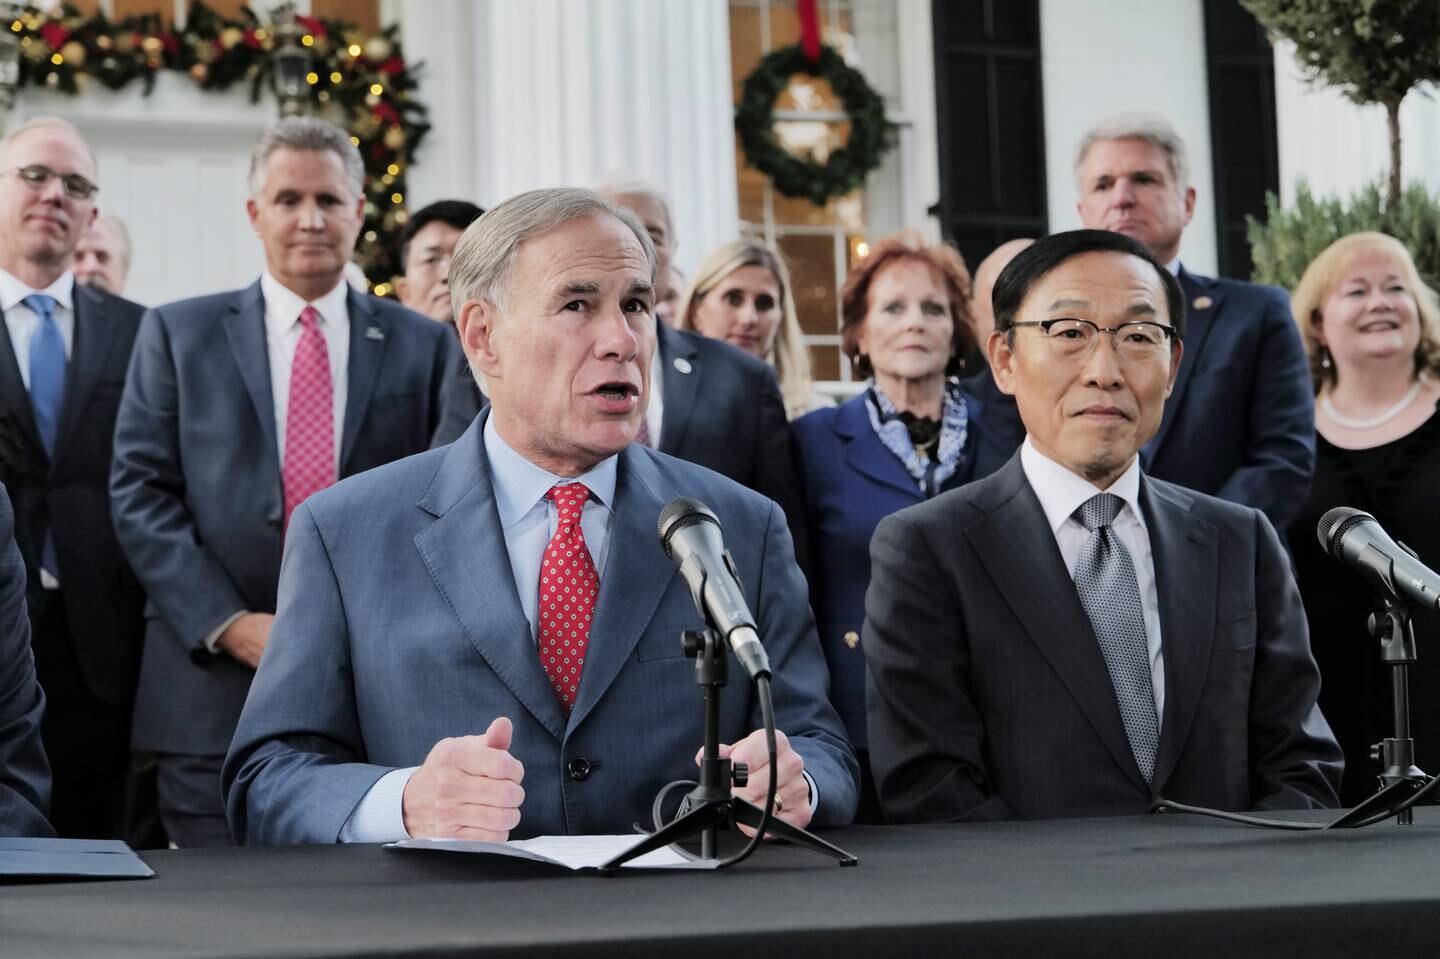 Texas Governor Greg Abbott and Samsung Electronics Vice Chairman Kim Ki-nam attend a press conference in Austin, Texas, last week. Abbott has loosened pandemic restrictions in the state. EPA